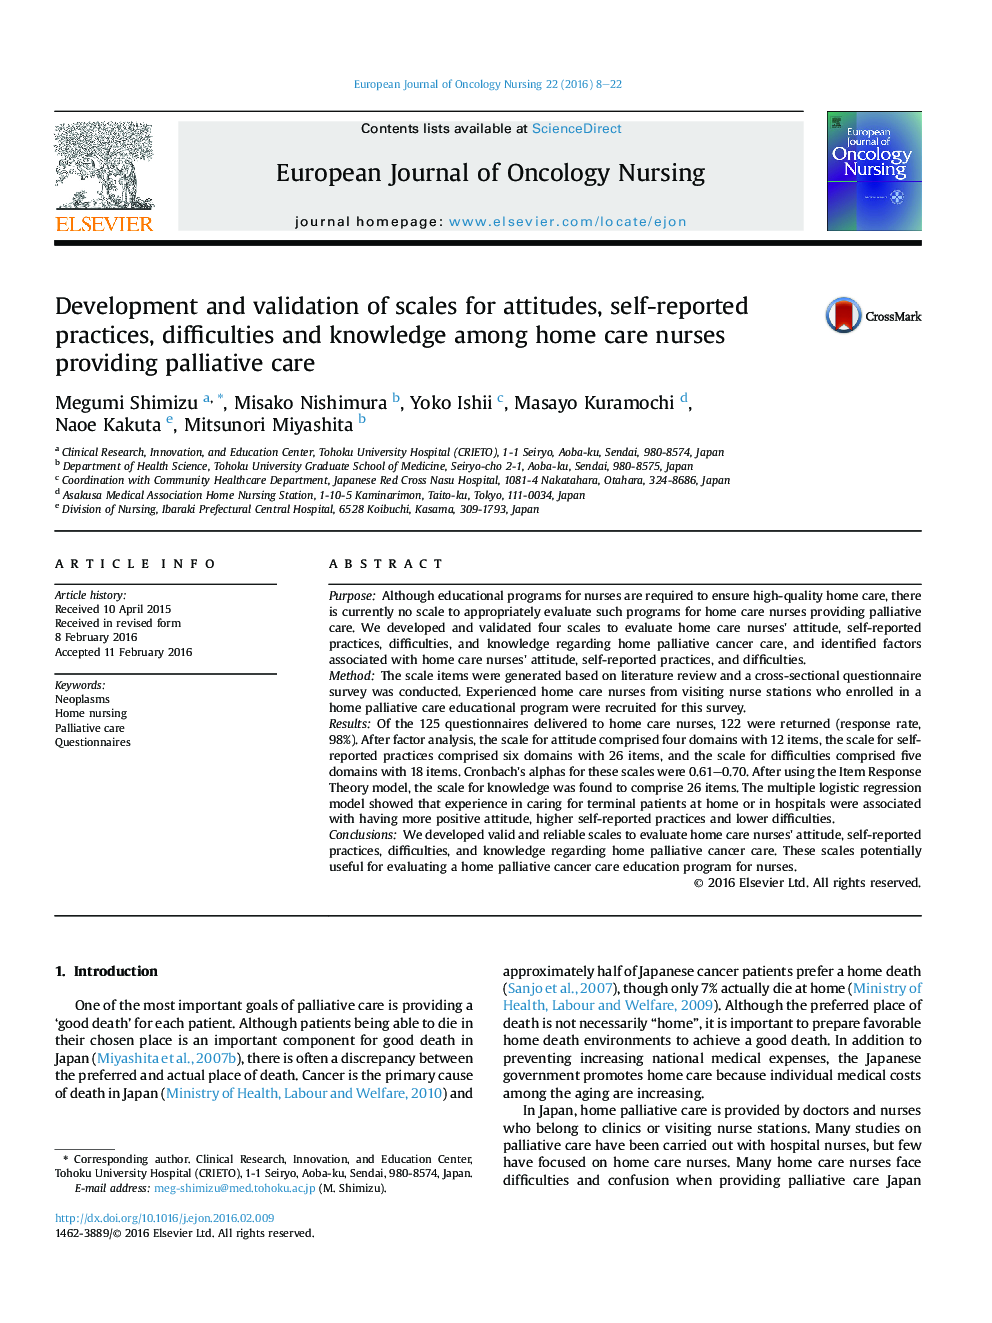 Development and validation of scales for attitudes, self-reported practices, difficulties and knowledge among home care nurses providing palliative care